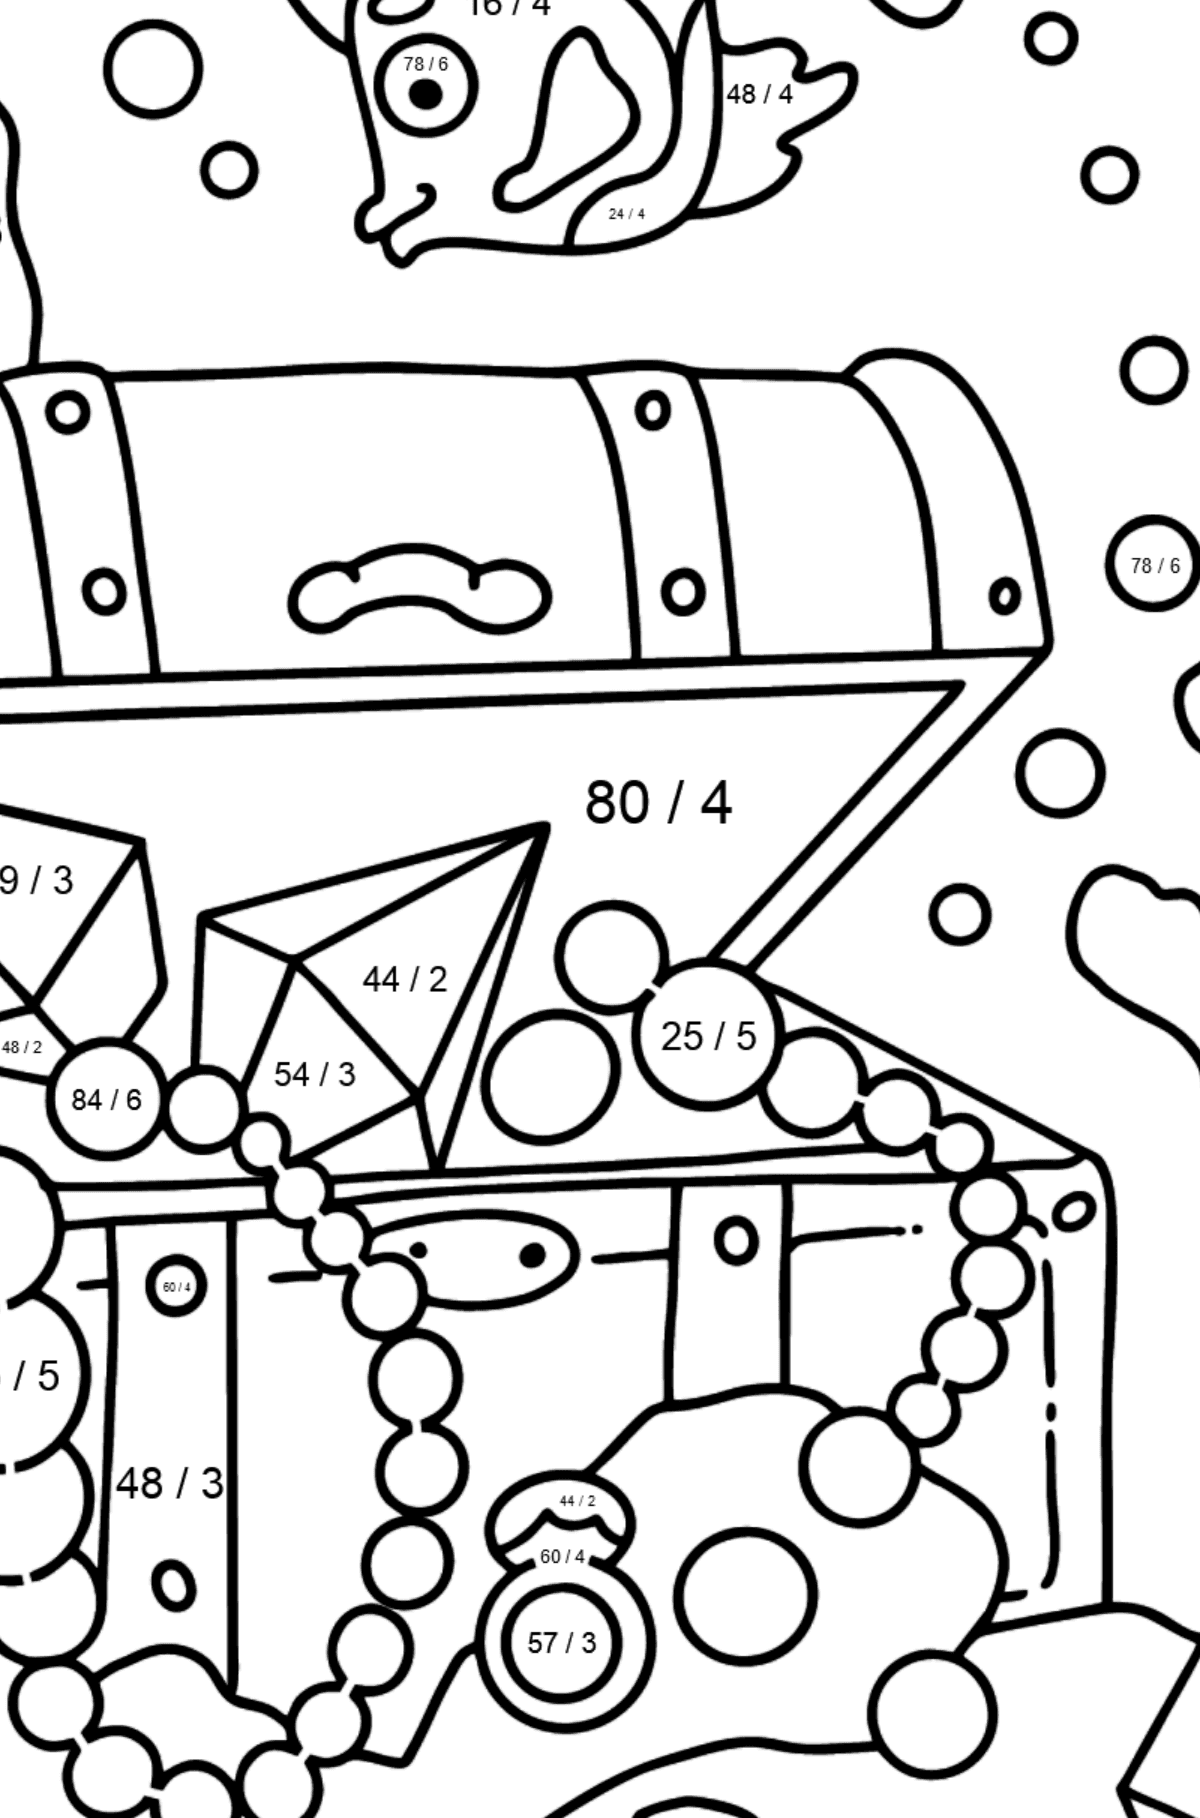 Coloring Page - A Fish is Looking for a Treasure - Math Coloring - Division for Kids